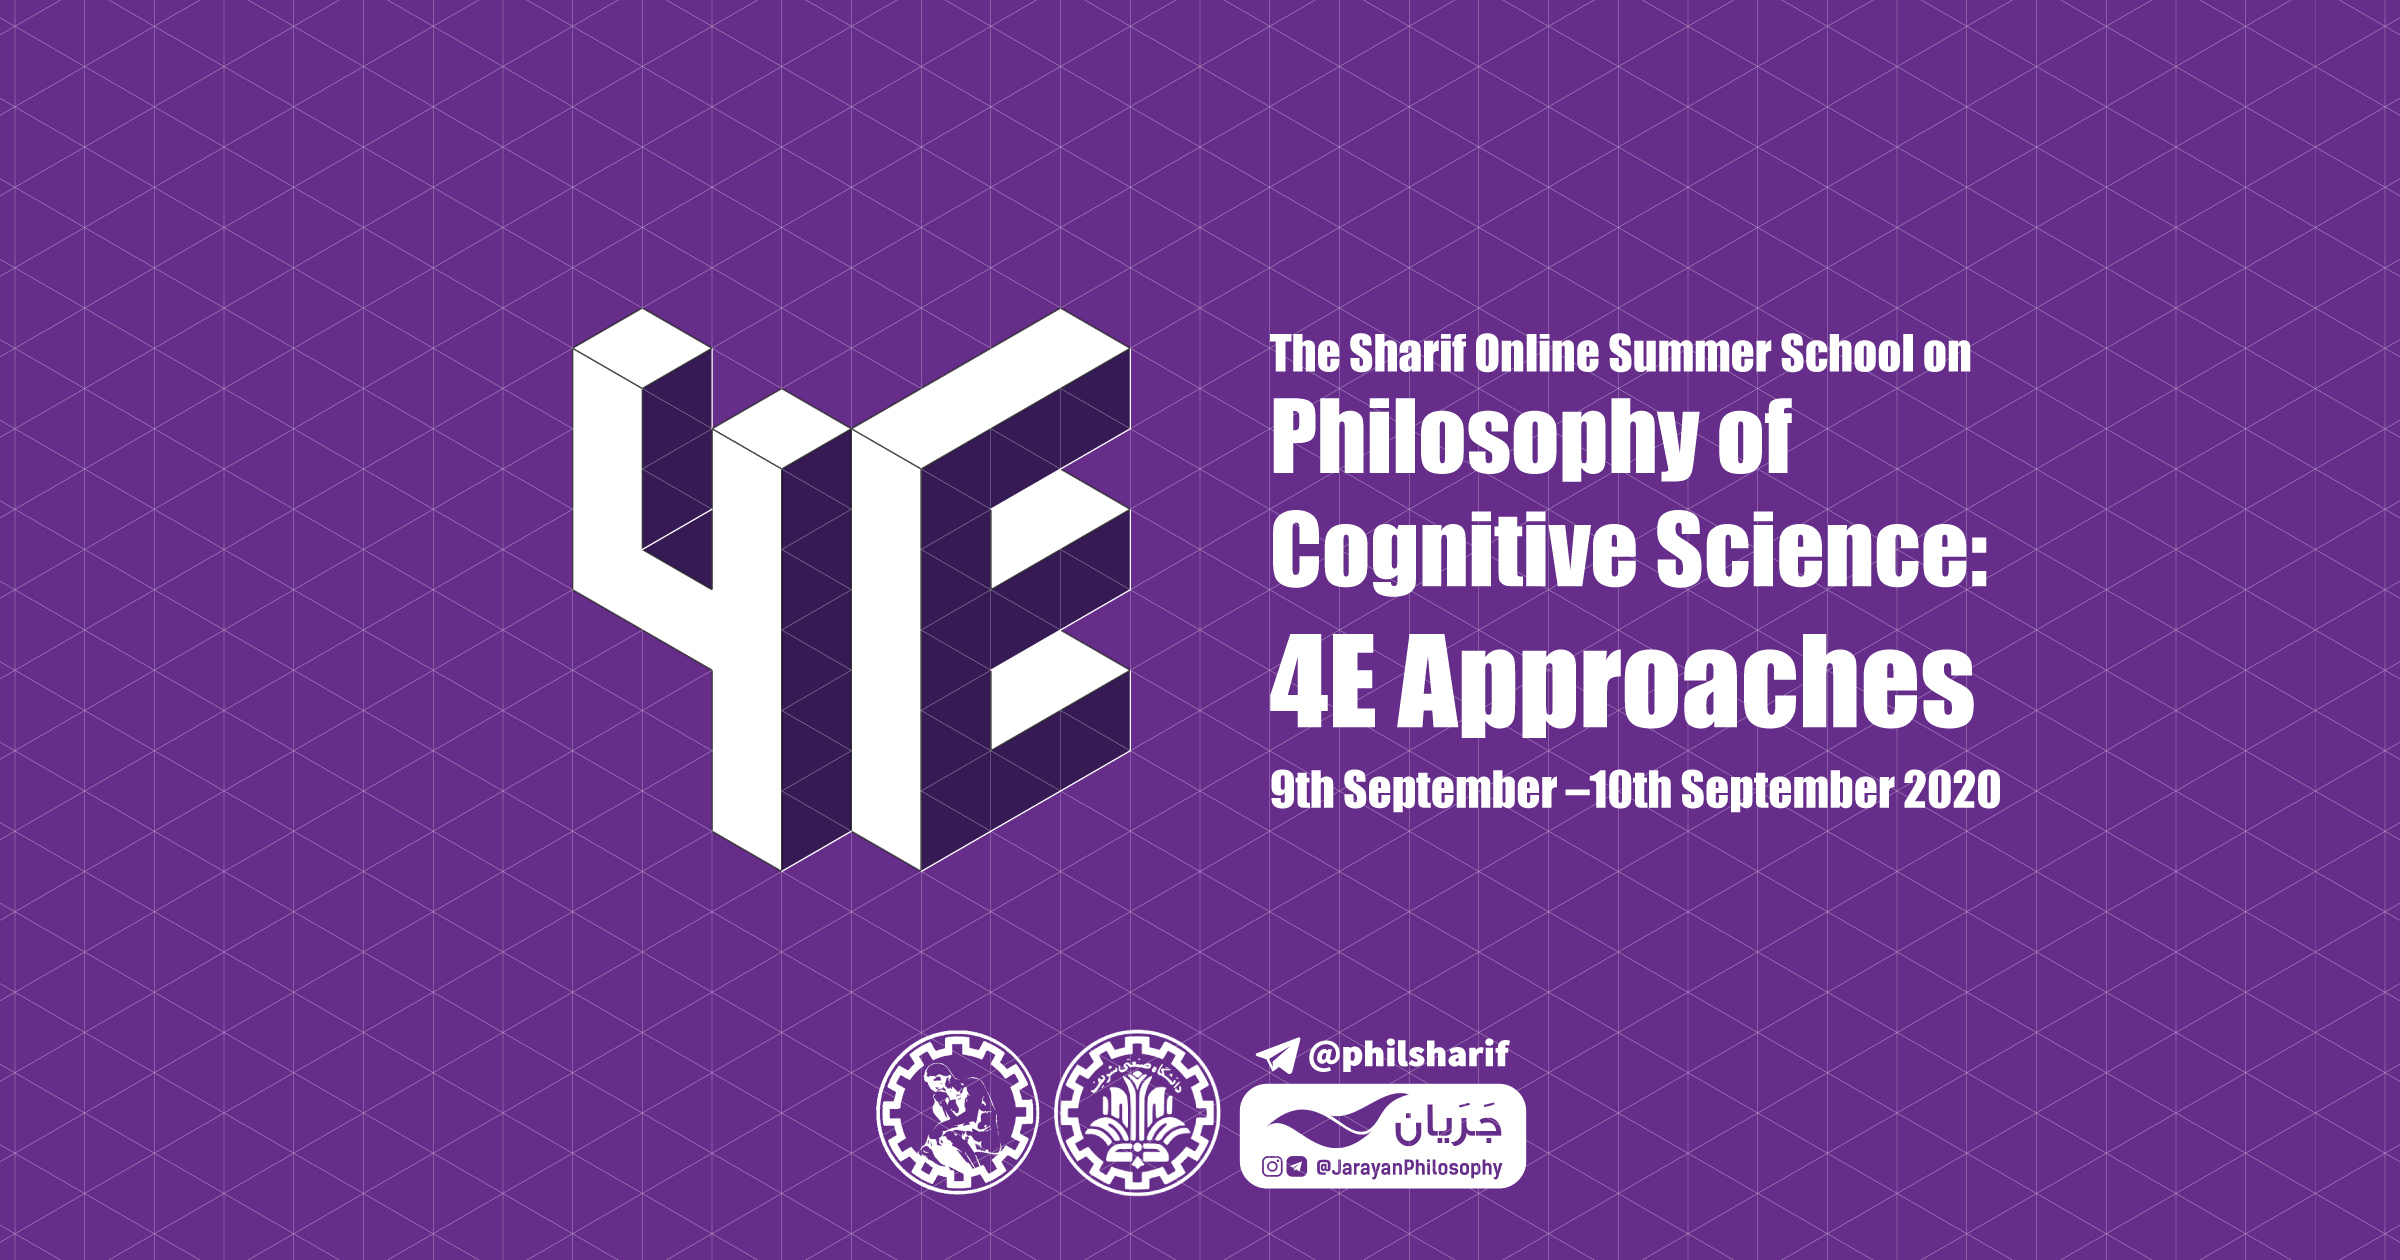 SHARIF Online Summer School on Philosophy of Cognitive Science: 4E Approaches